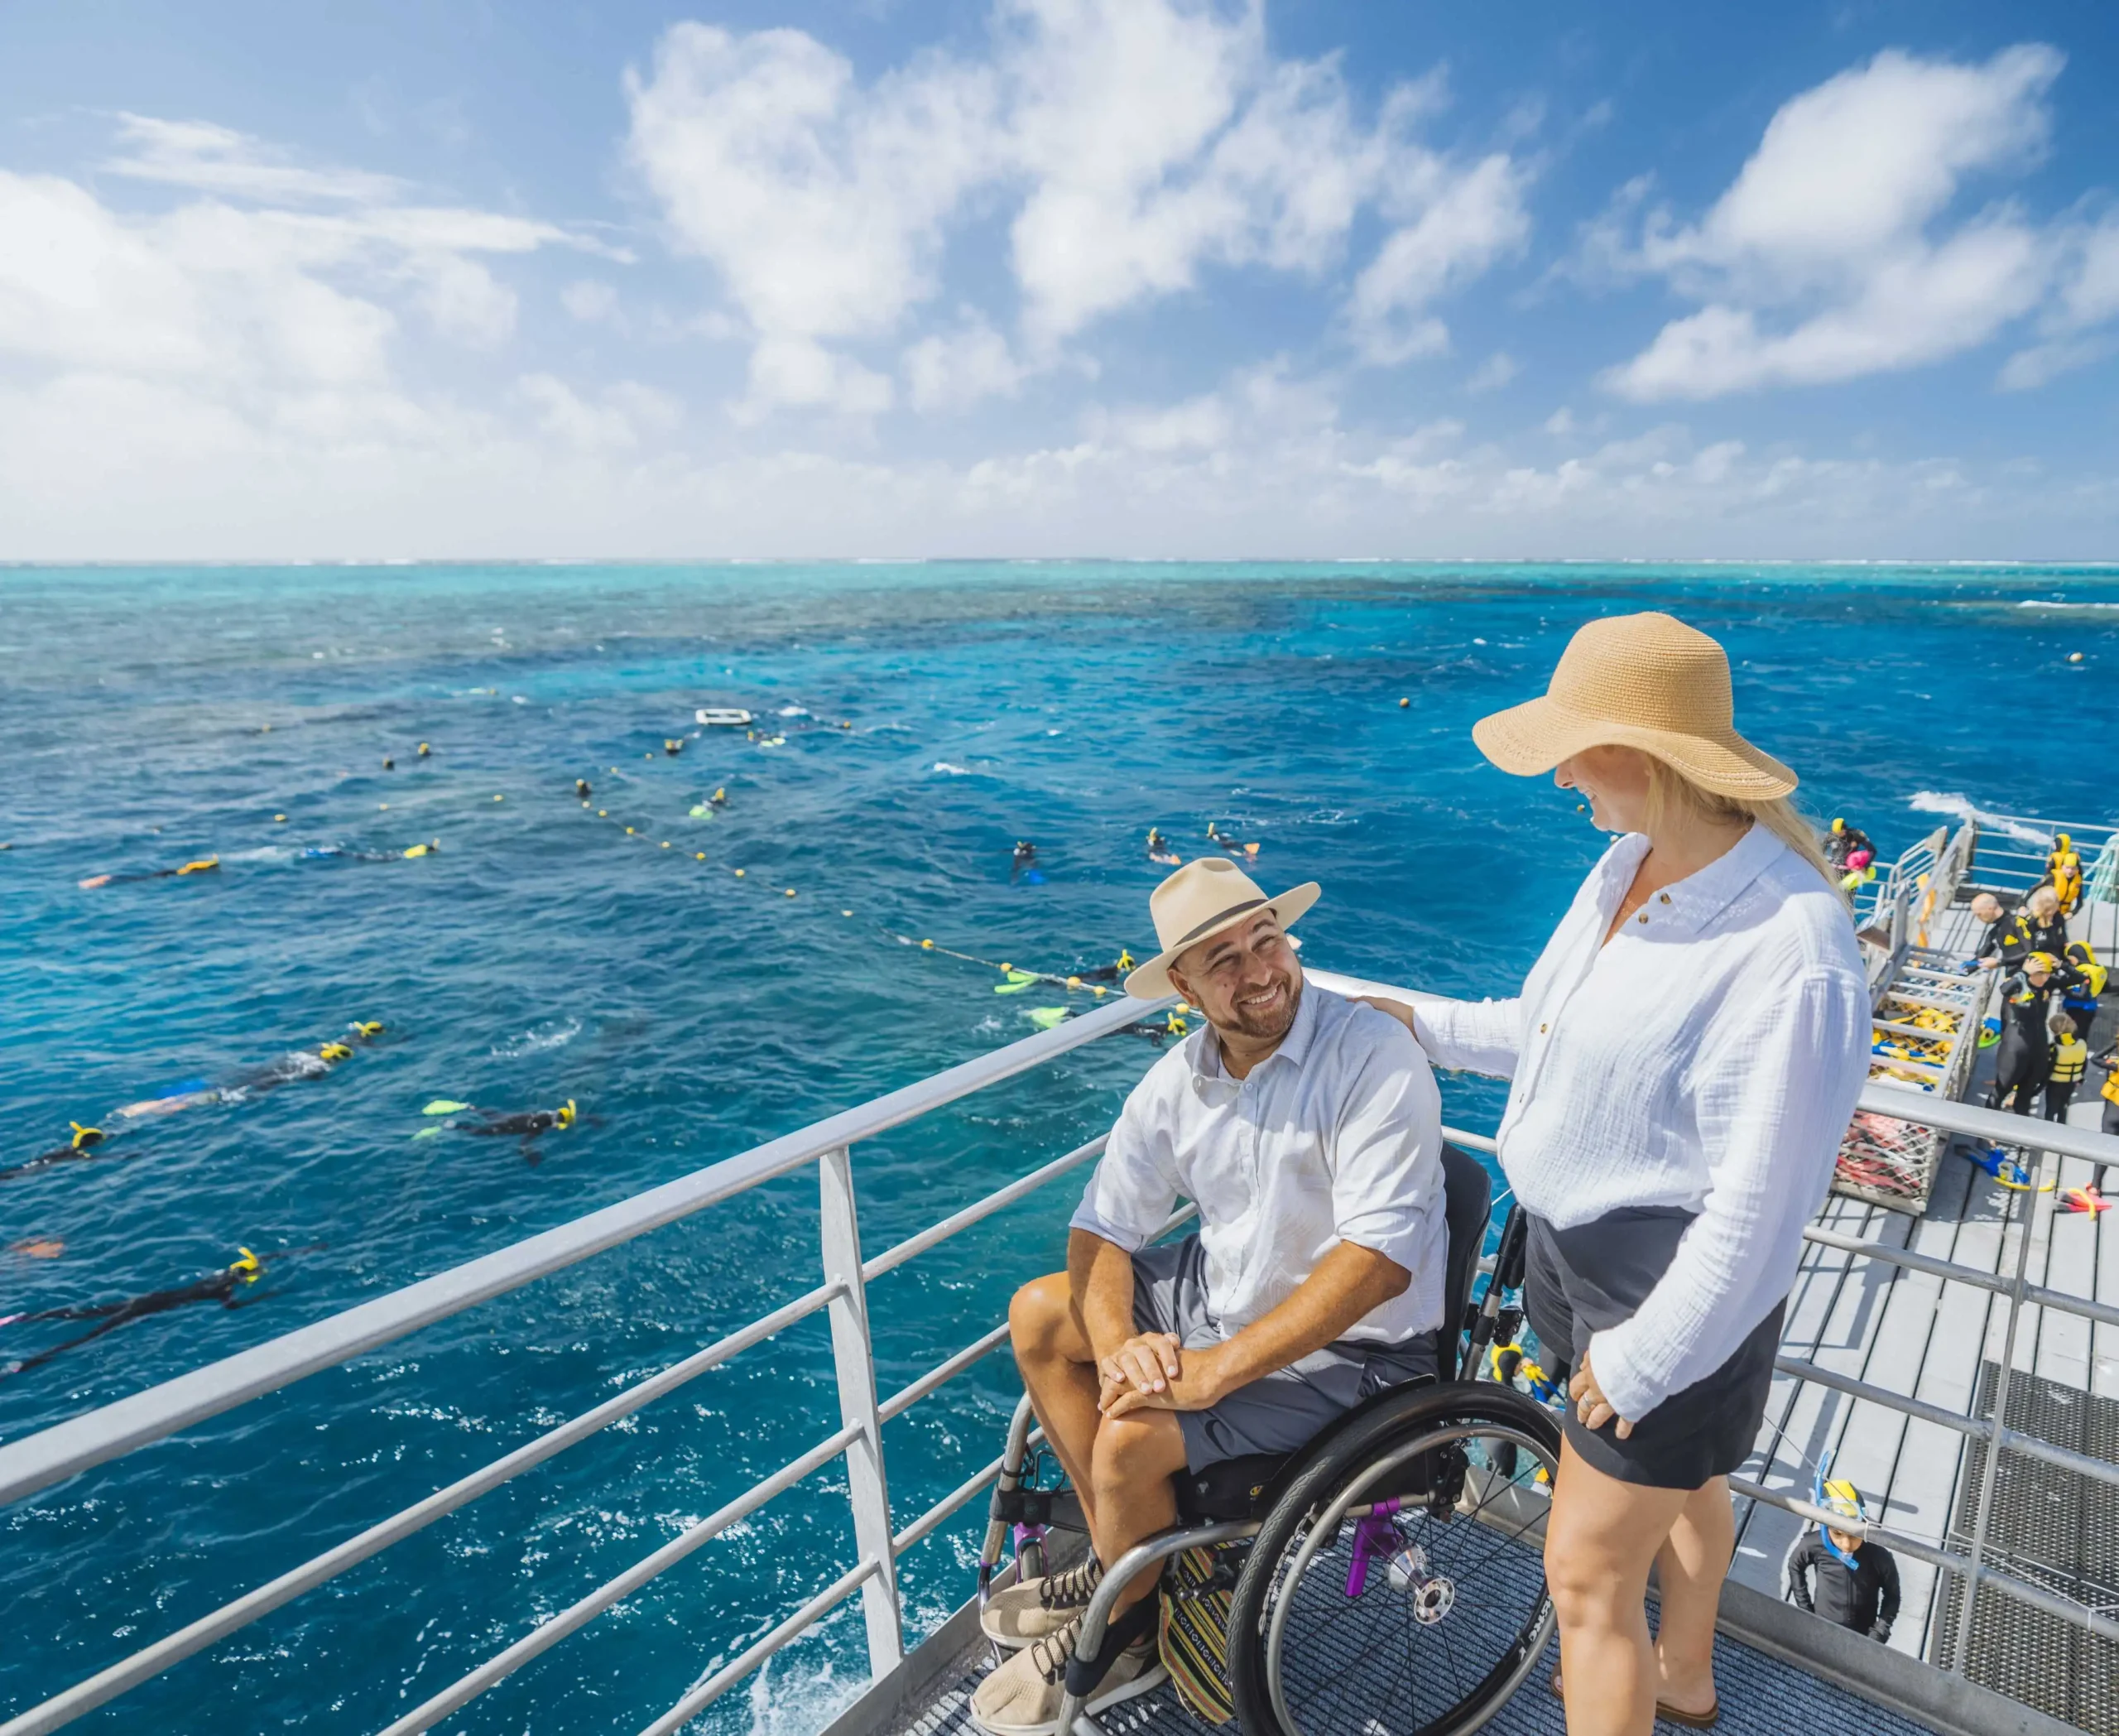 A female wearing a sun hat and a male wheelchair user smiling on a cruise deck visitng the bright blue reef.